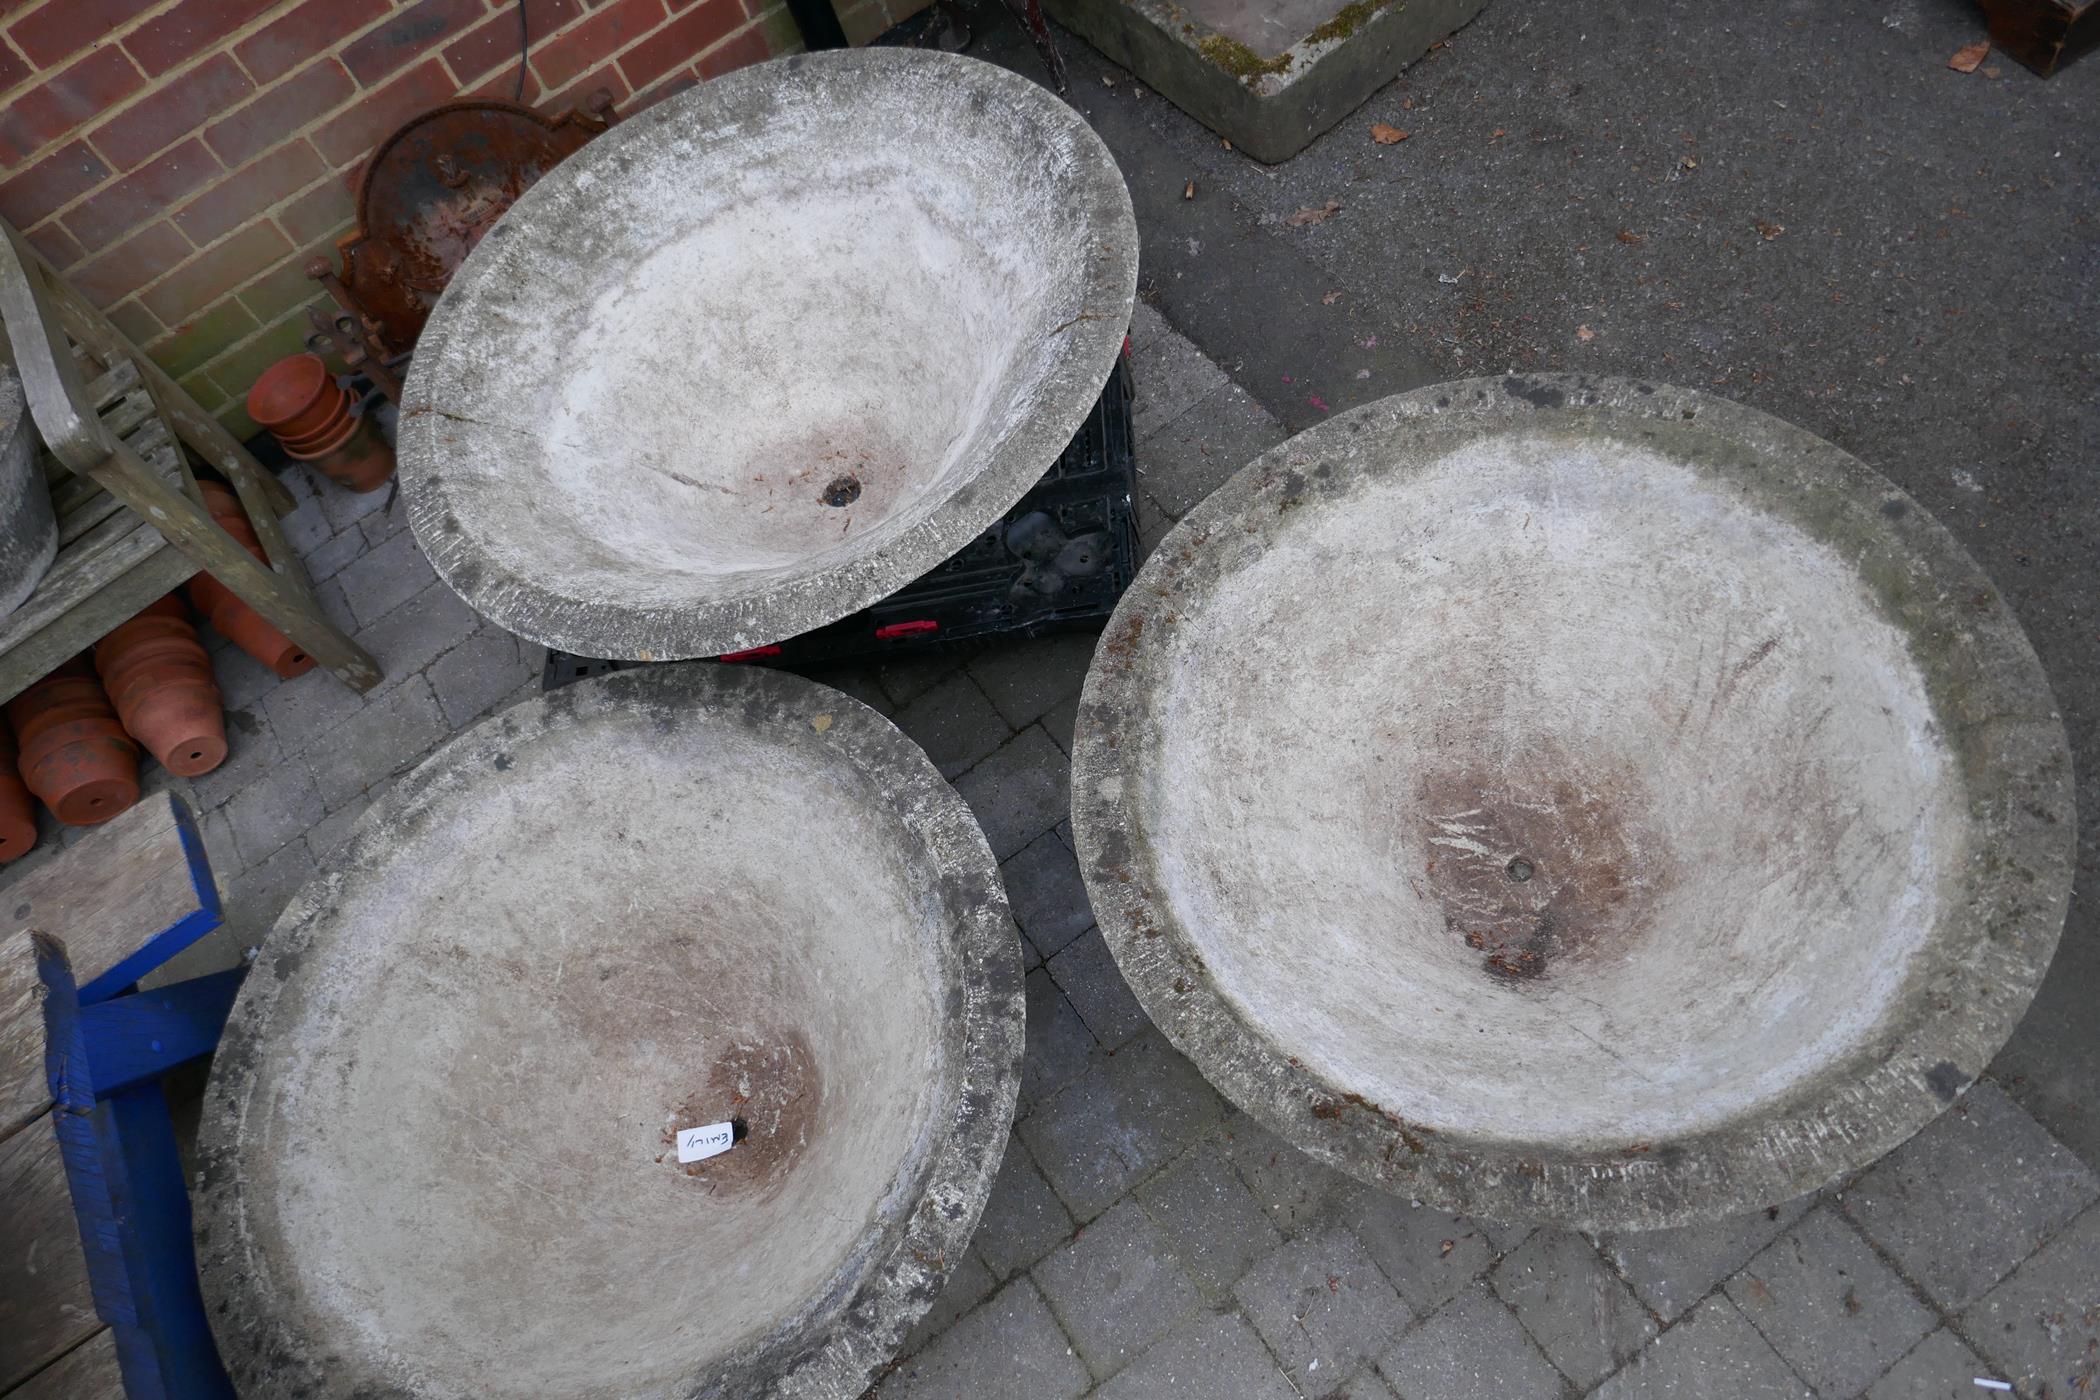 Three mid century conical concrete garden planters with bark effect exterior, 35" diameter - Image 5 of 6